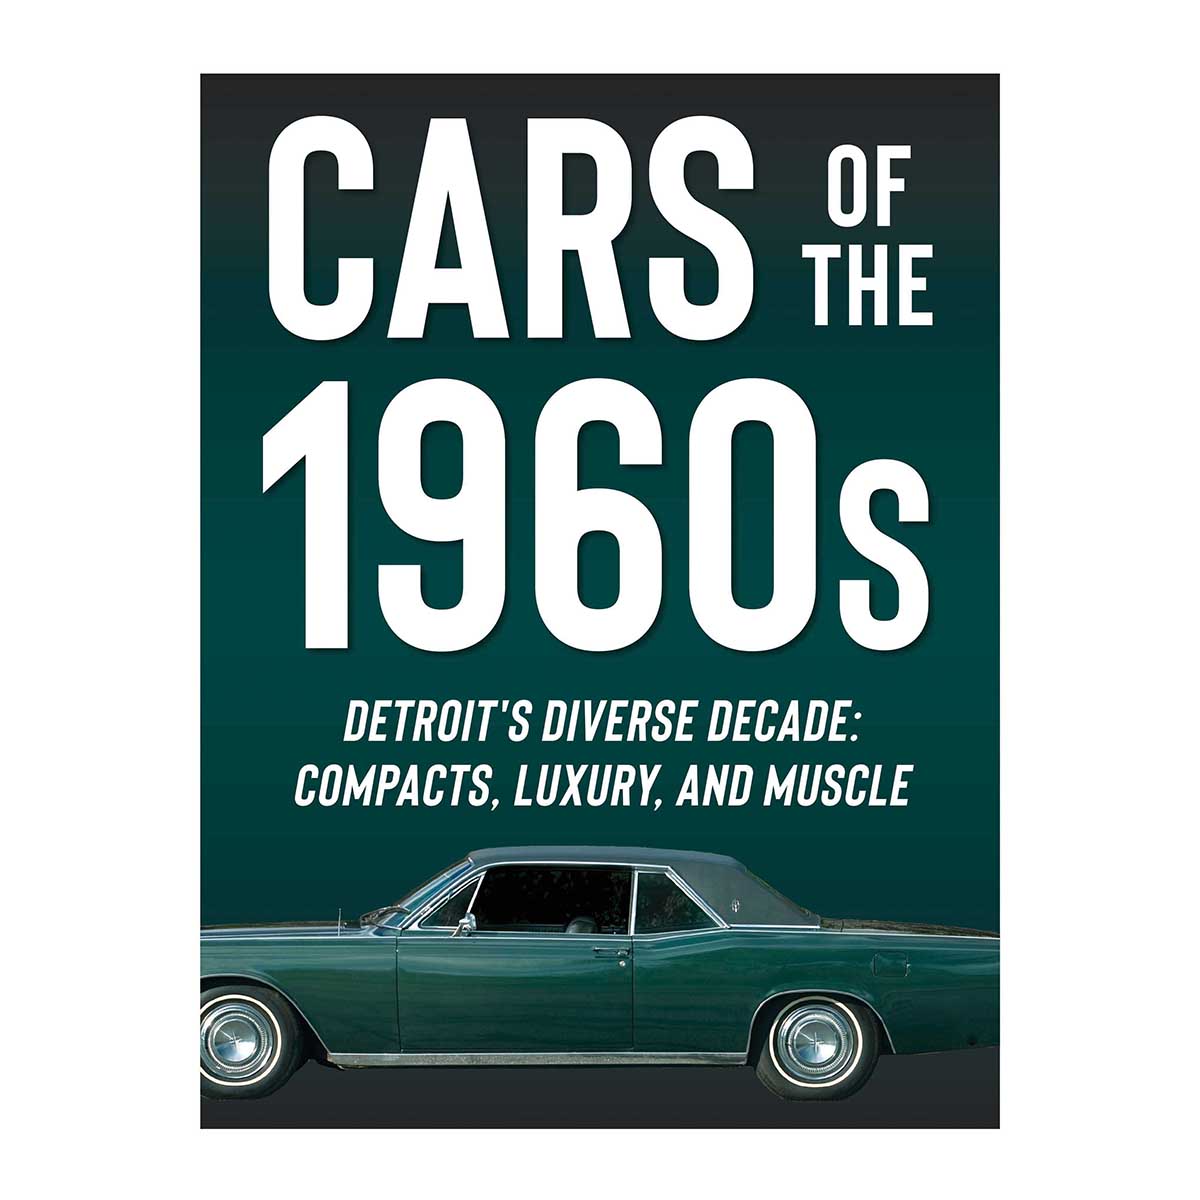 Cars of the 1960s